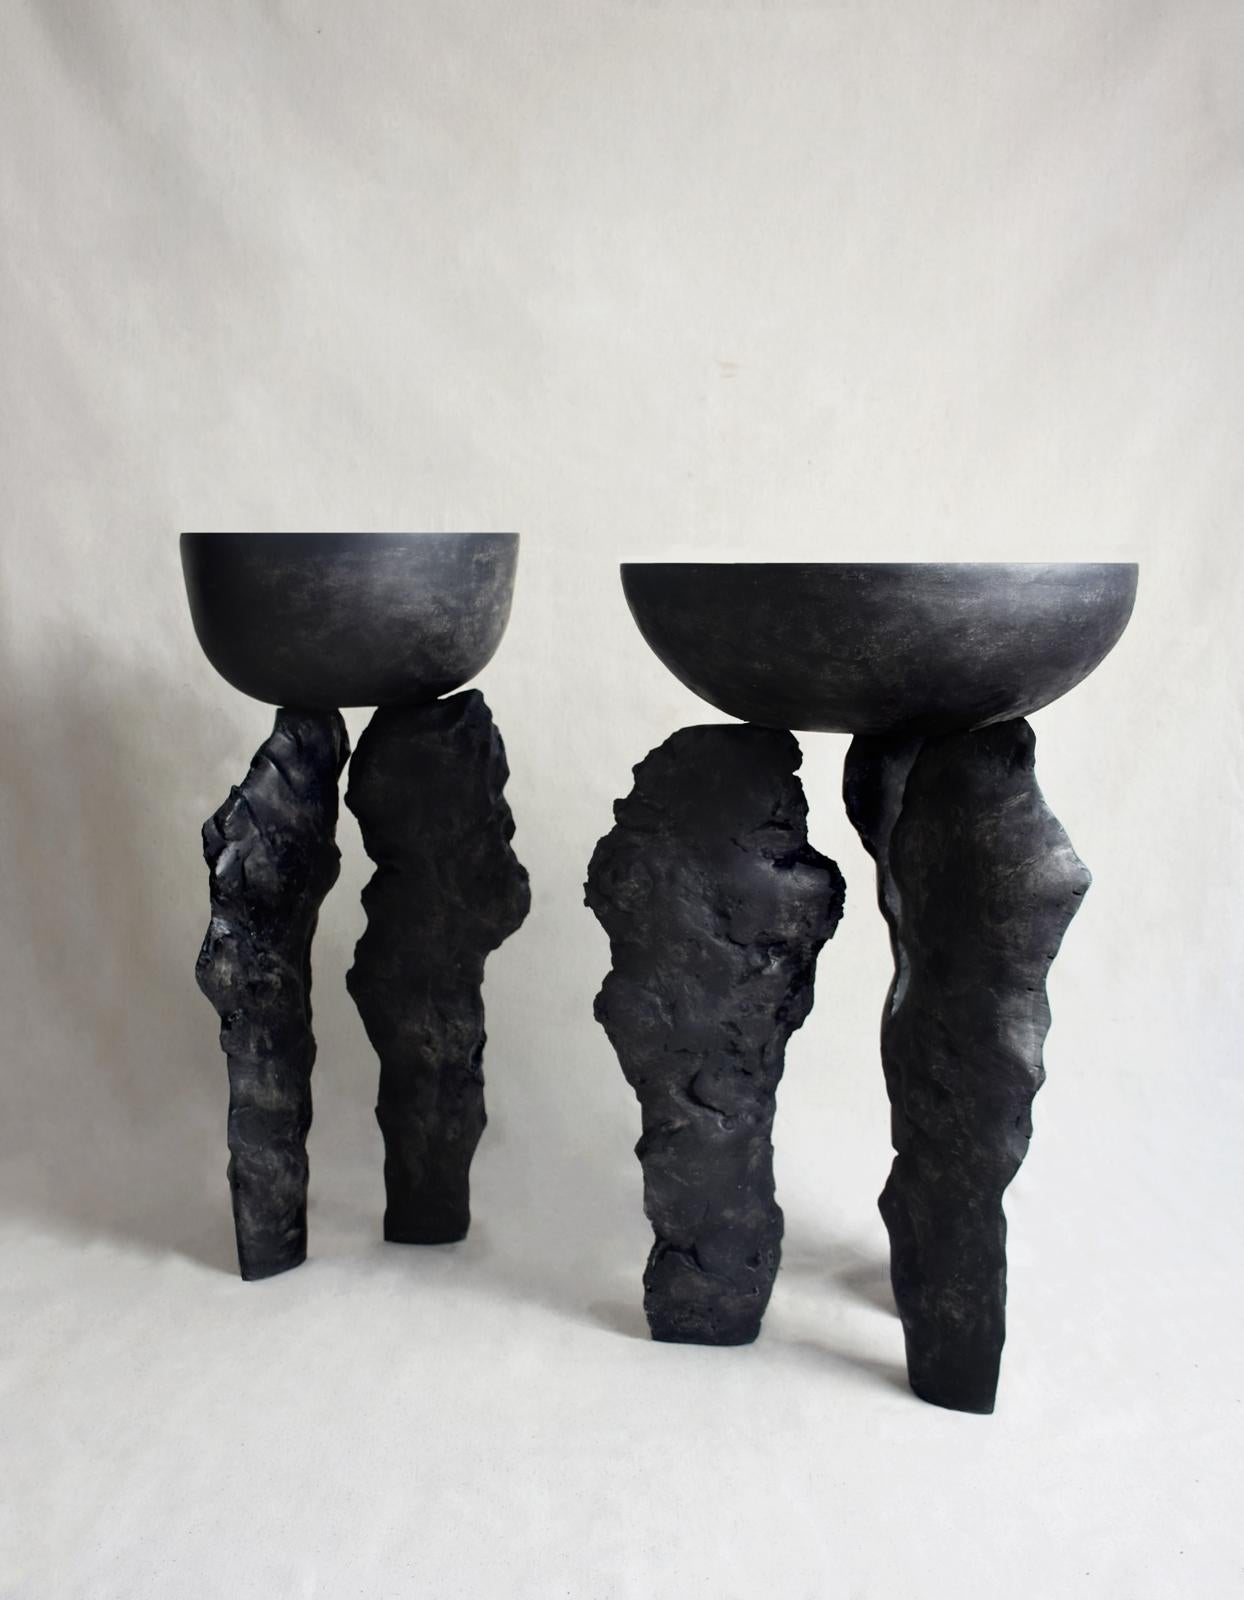 Canadian Burnt Works Table I by Isac Elam Kaid